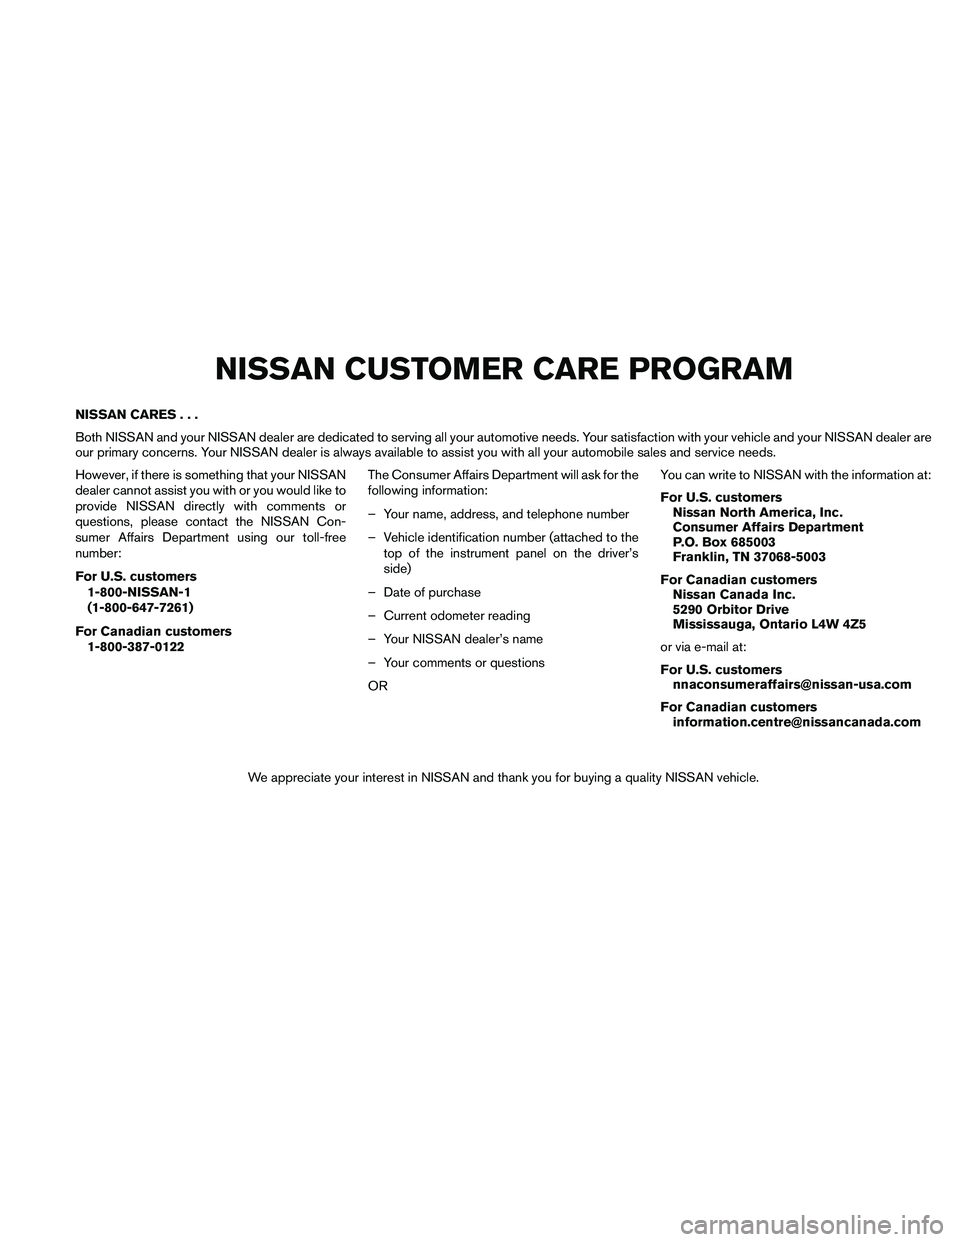 NISSAN ALTIMA 2011  Owners Manual NISSAN CARES...
Both NISSAN and your NISSAN dealer are dedicated to serving all your automotive needs. Your satisfaction with your vehicle and your NISSAN dealer are
our primary concerns. Your NISSAN 